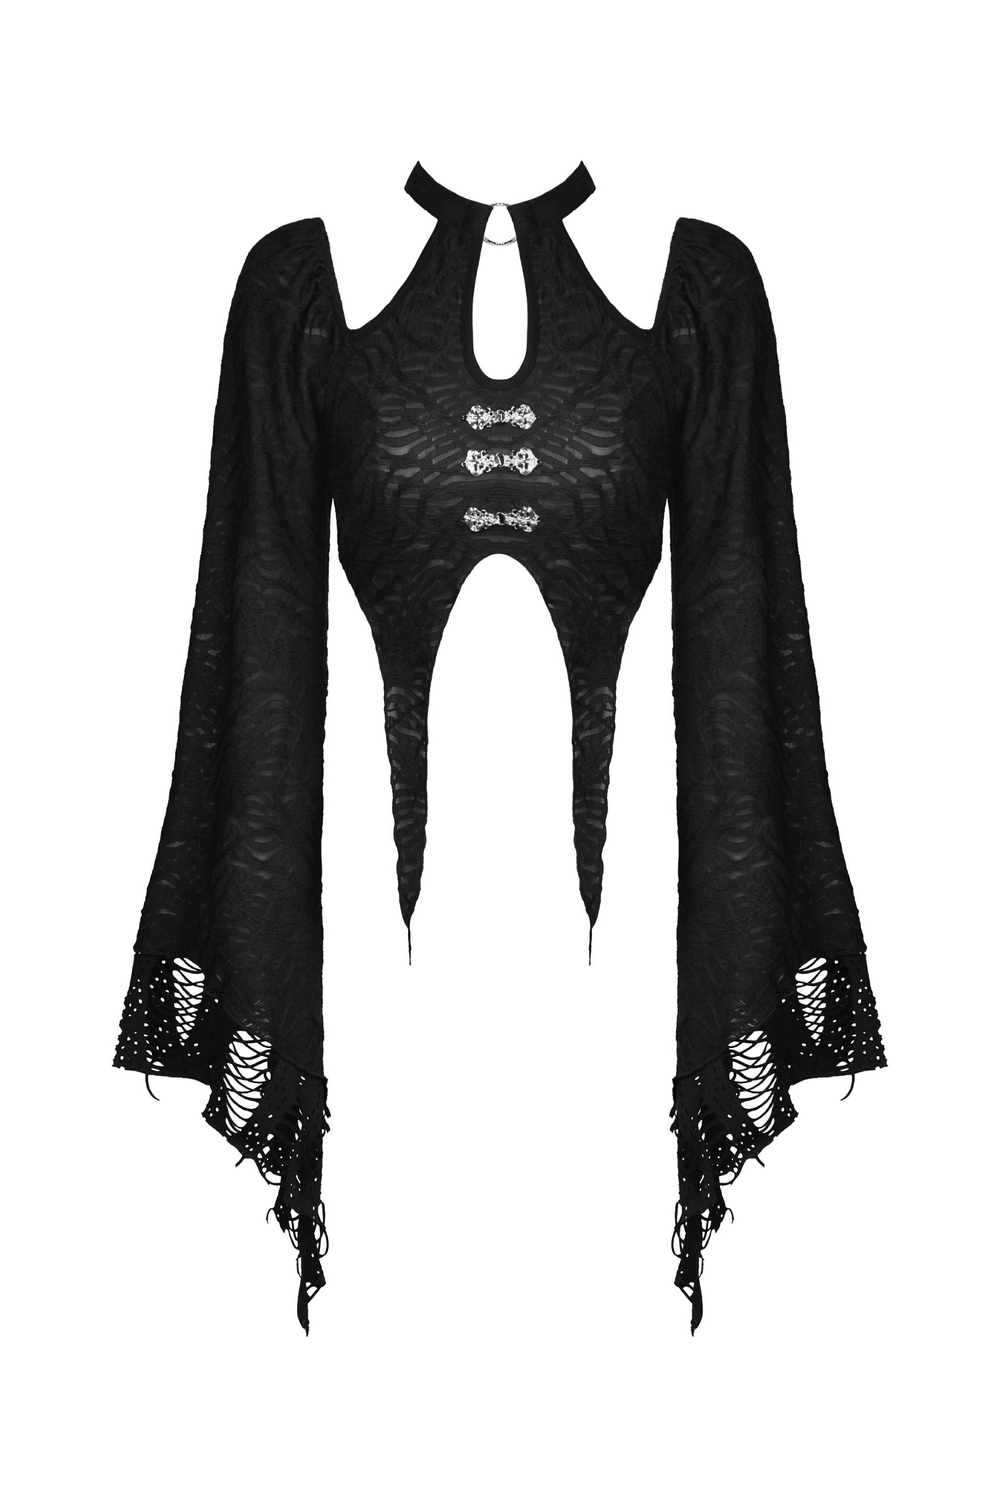 Victorian Steampunk Bell Sleeves Crop Top for Women